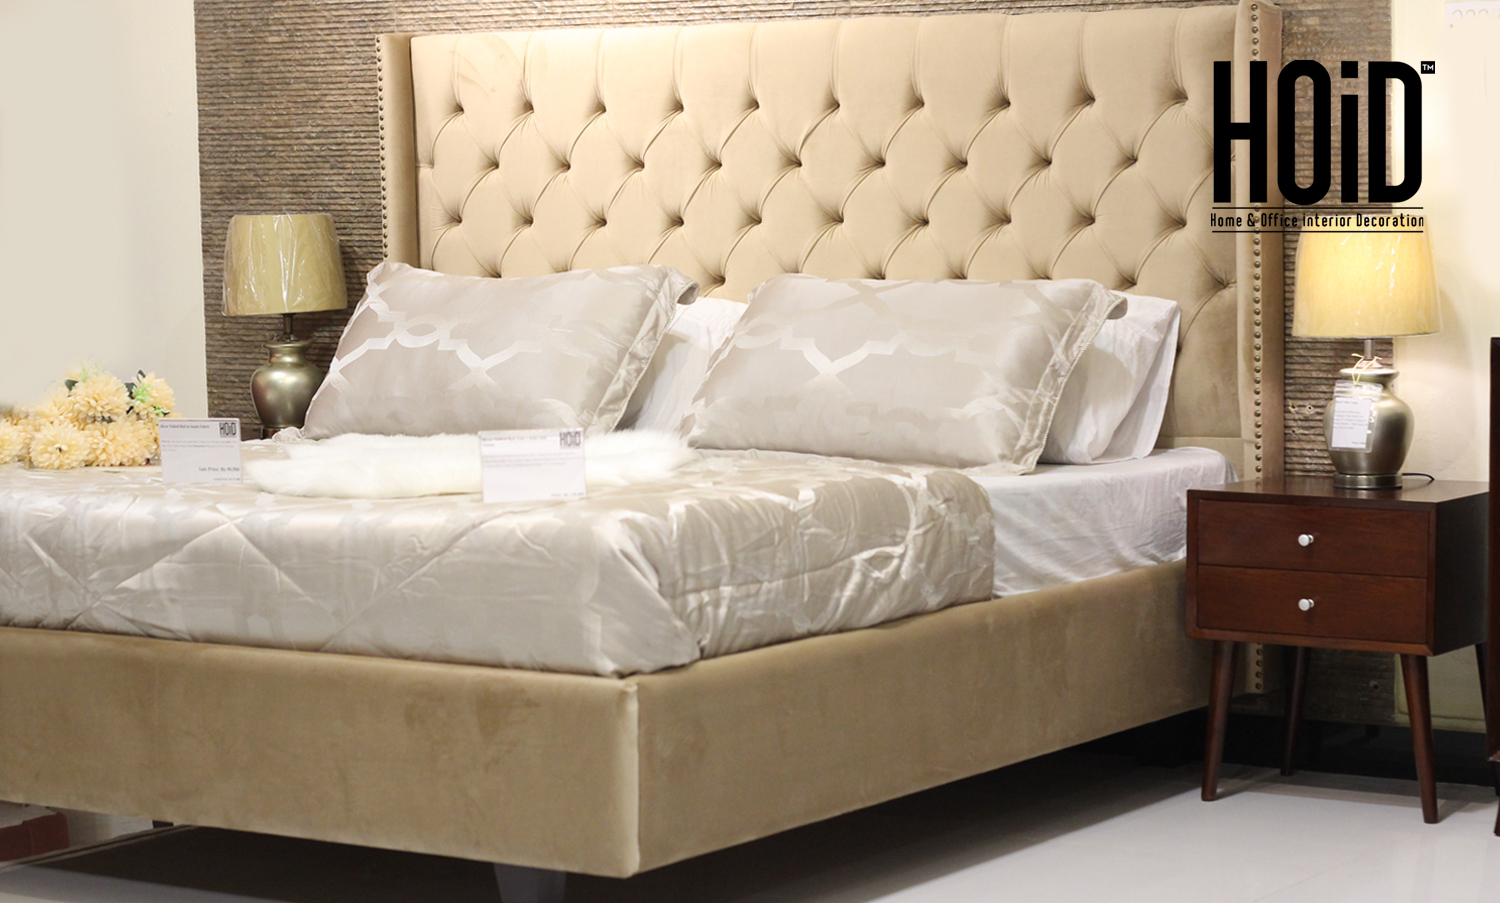 river-bed-with-kiki-side-tables-01-1.jpg